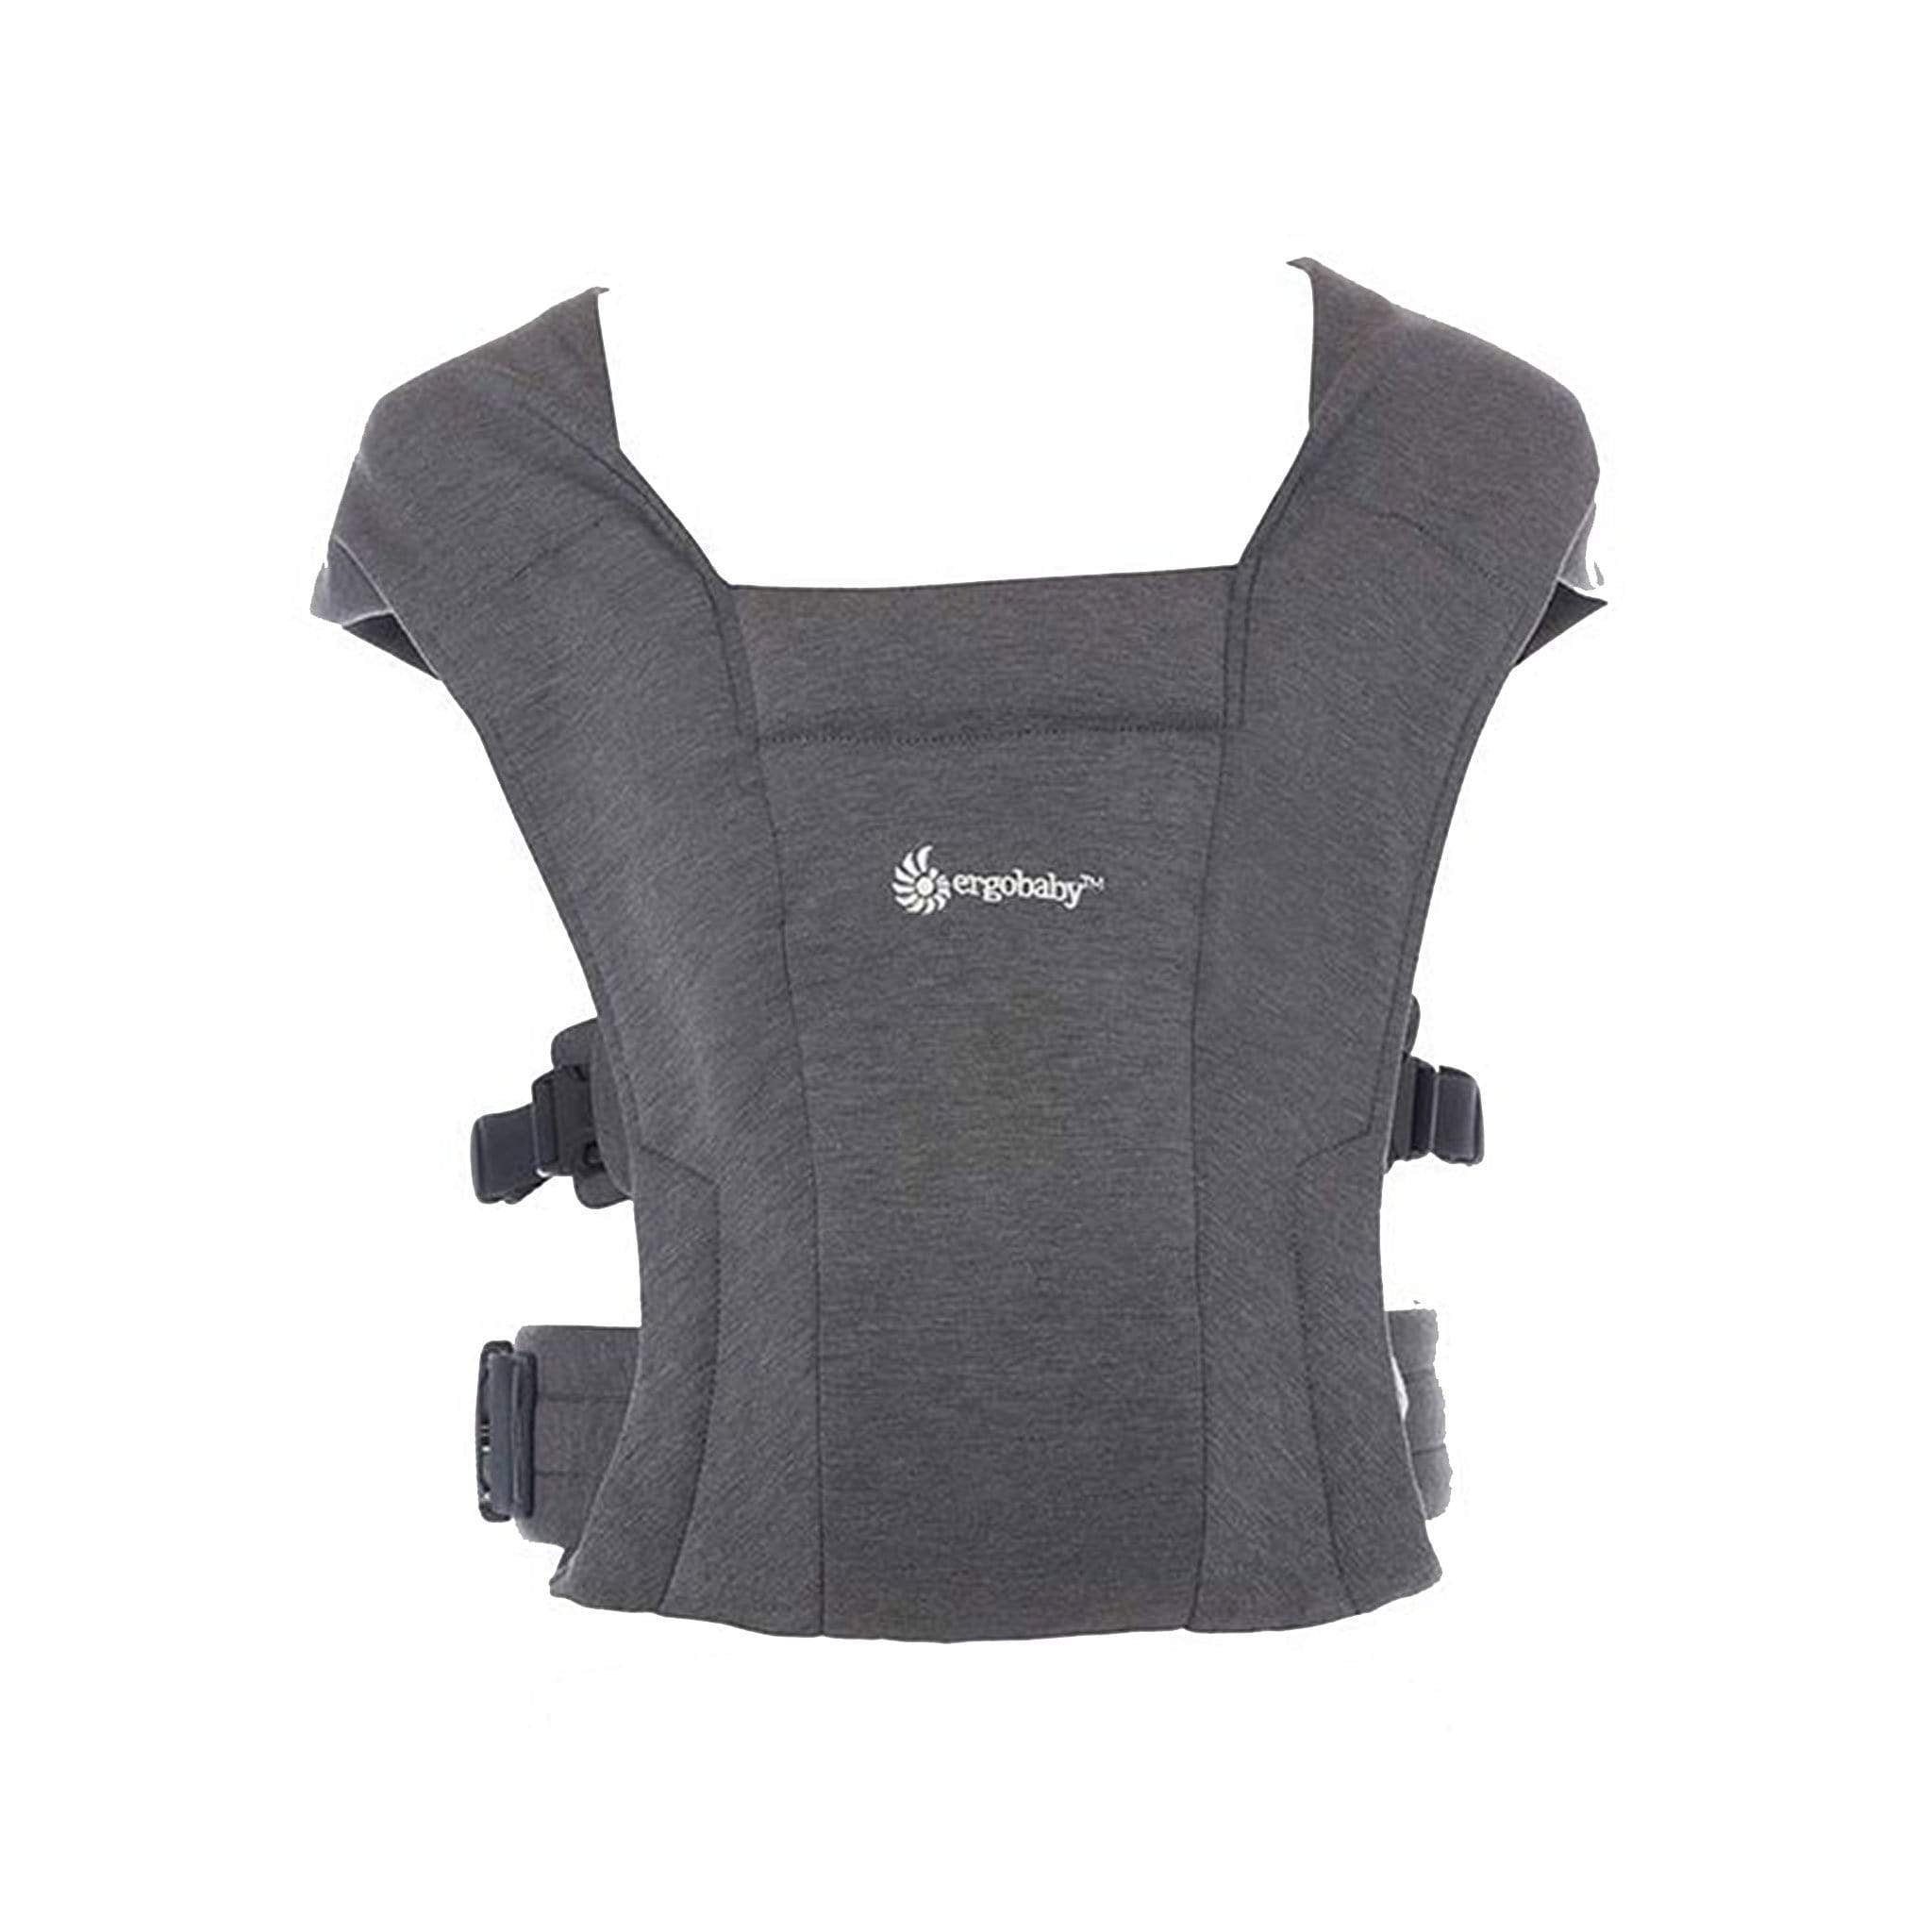 Ergobaby Embrace Carrier in Heather Grey